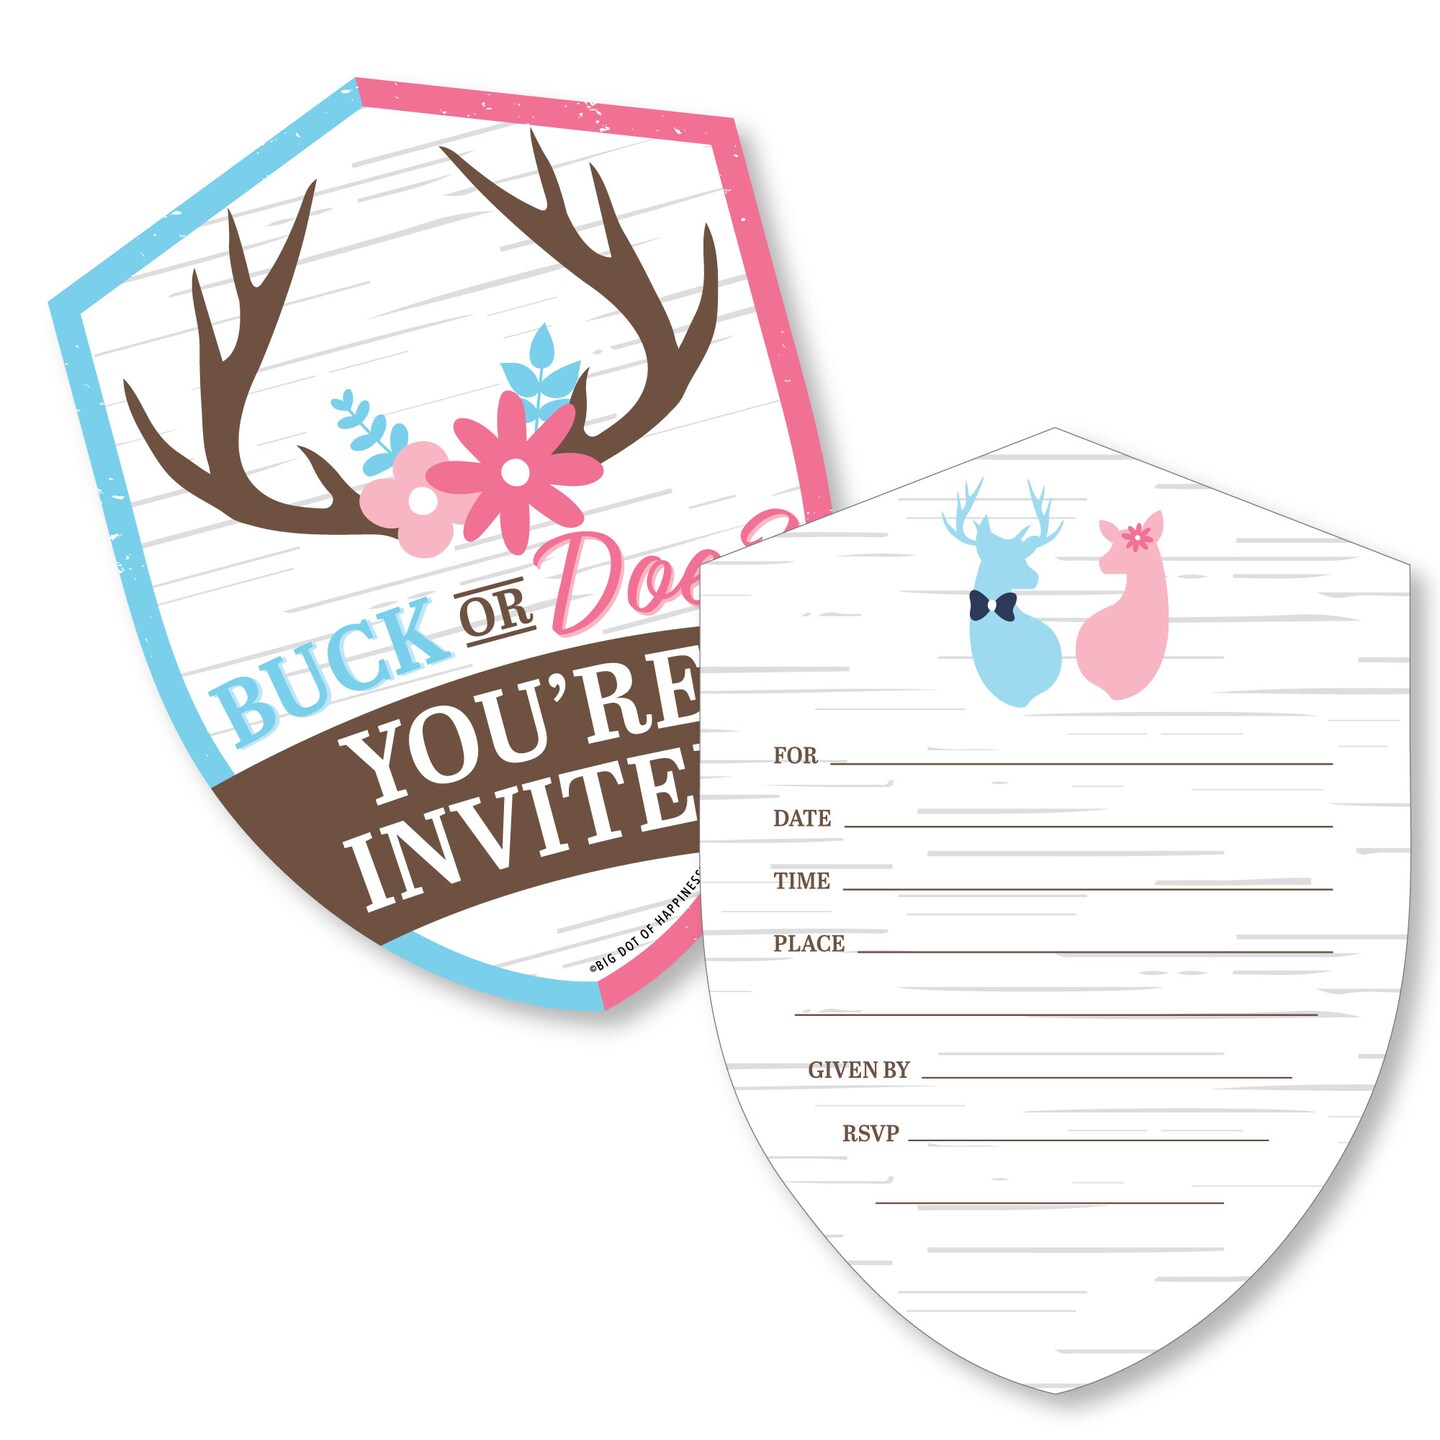 Big Dot of Happiness Buck or Doe - Shaped Fill-In Invitations - Hunting Gender Reveal Party Invitation Cards with Envelopes - Set of 12